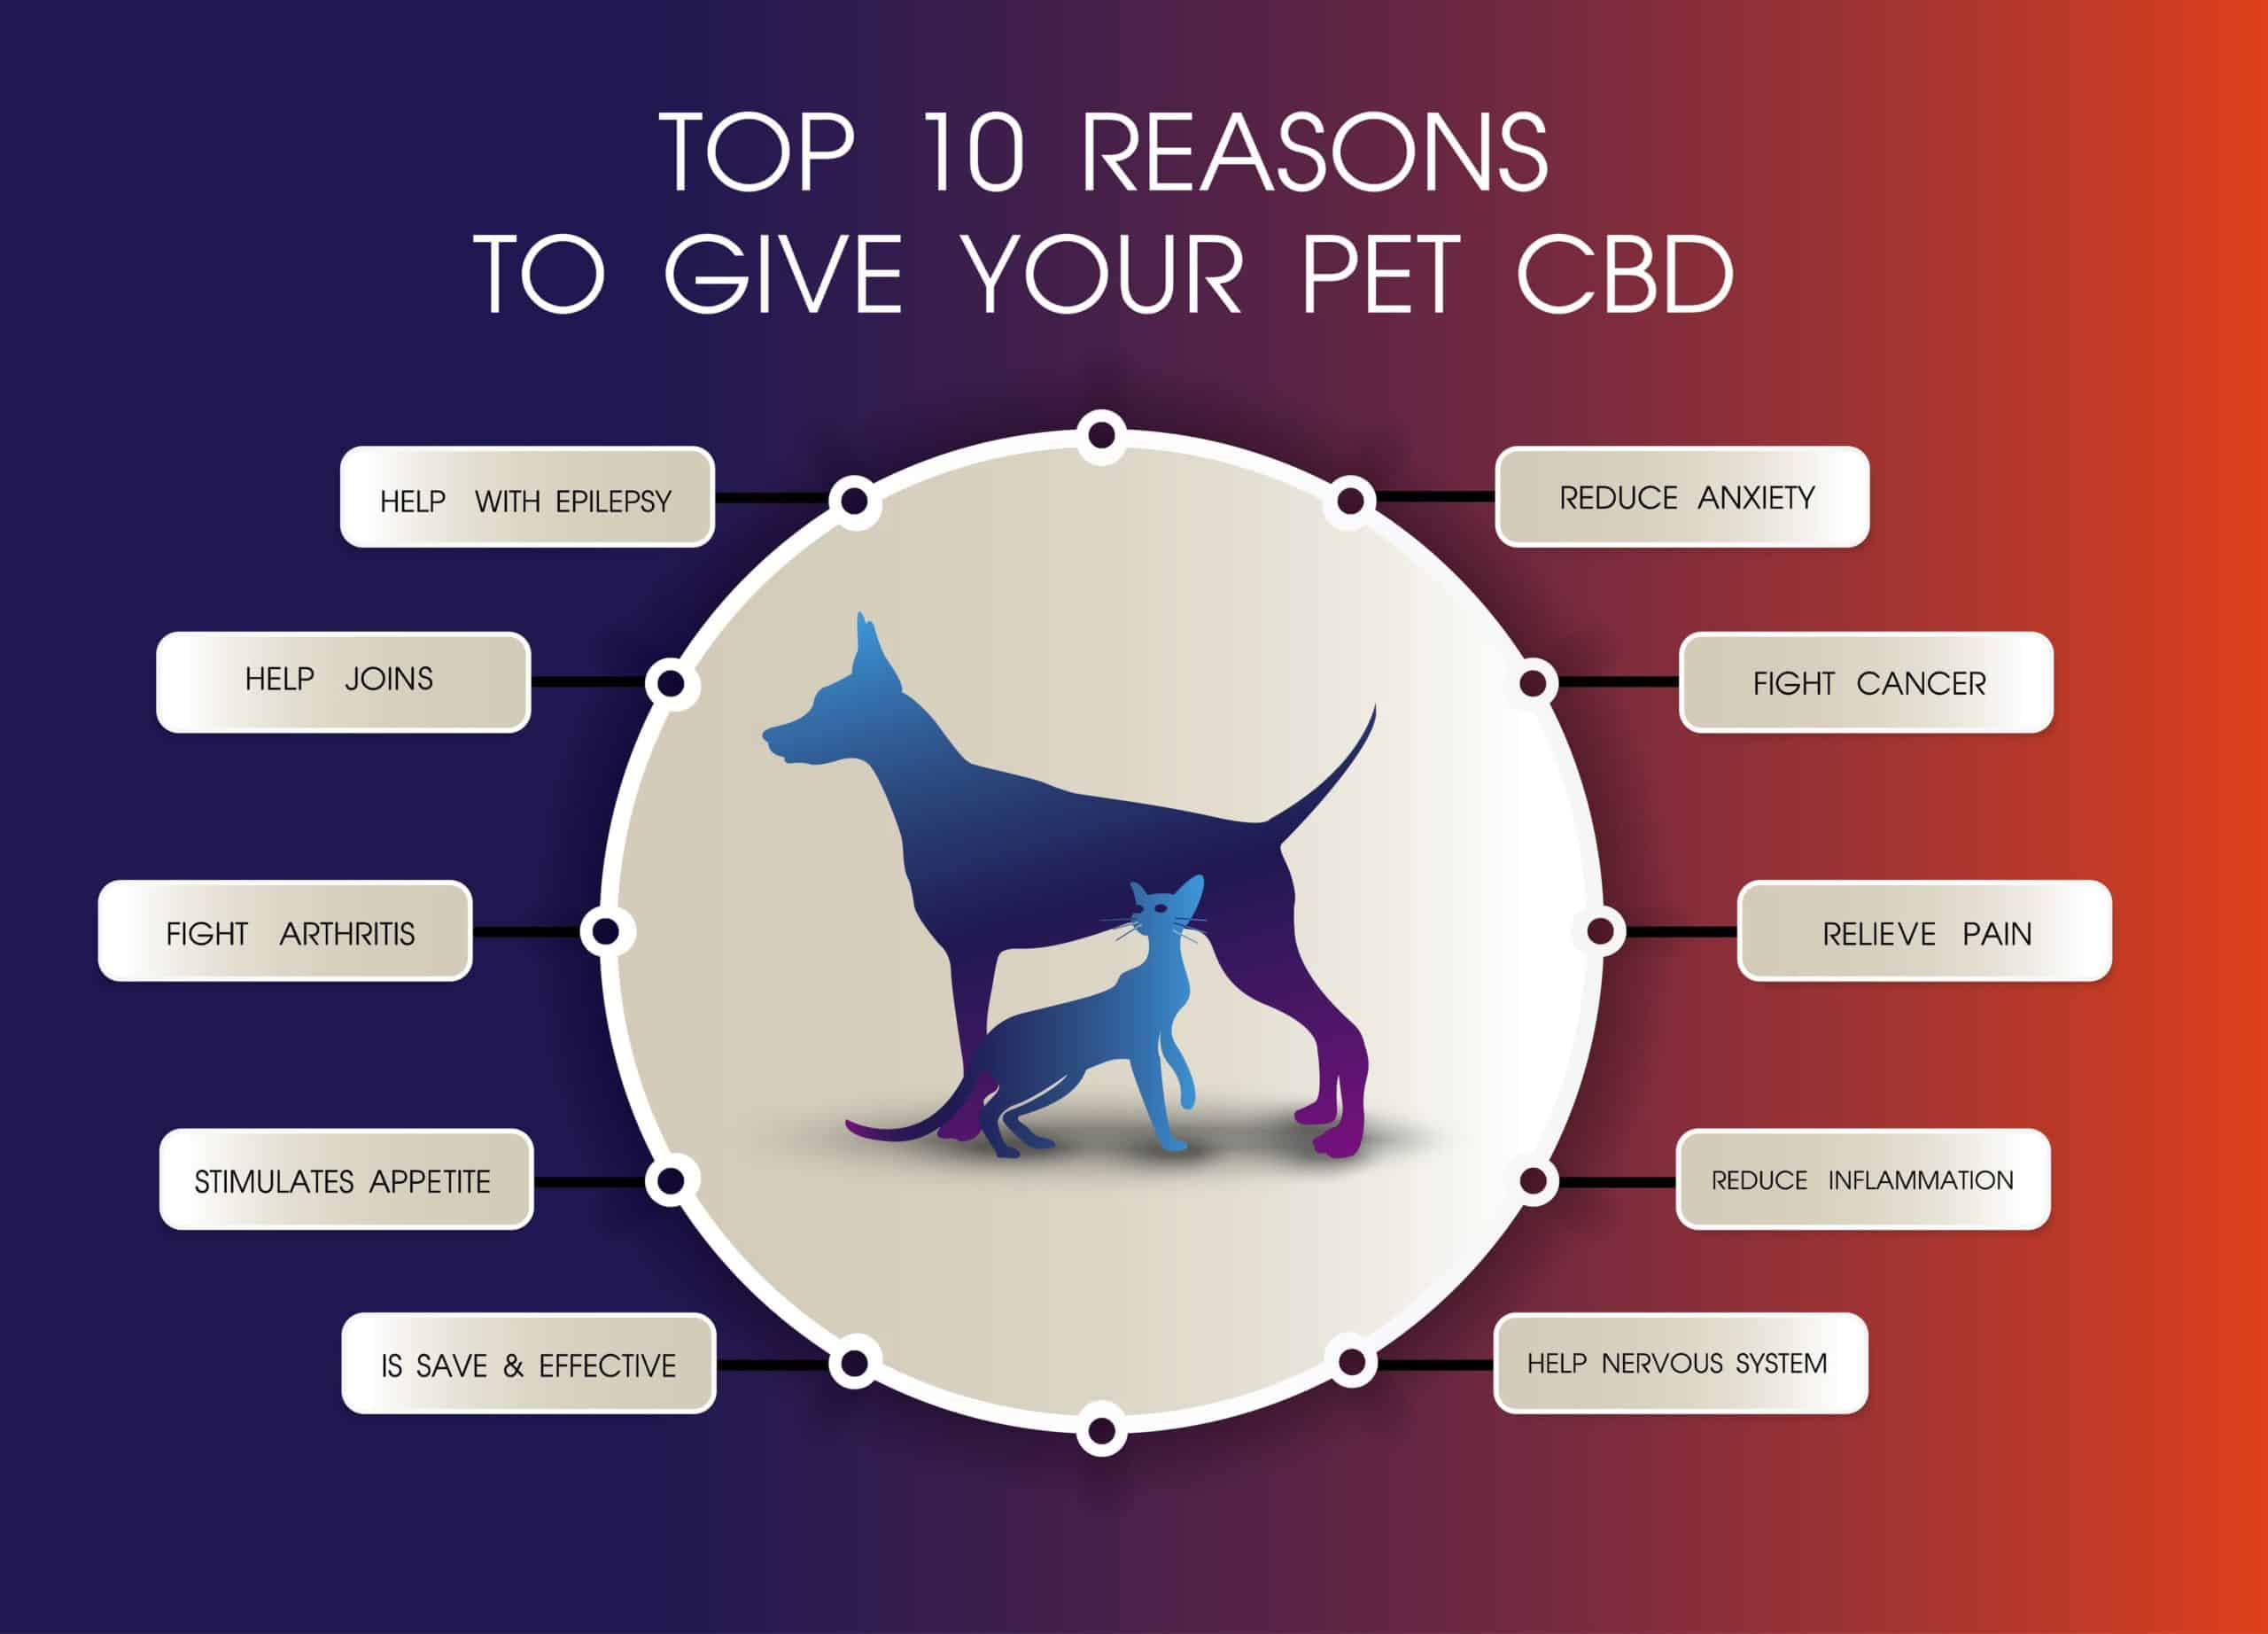 Graphic details benefits of CBD products for pets.